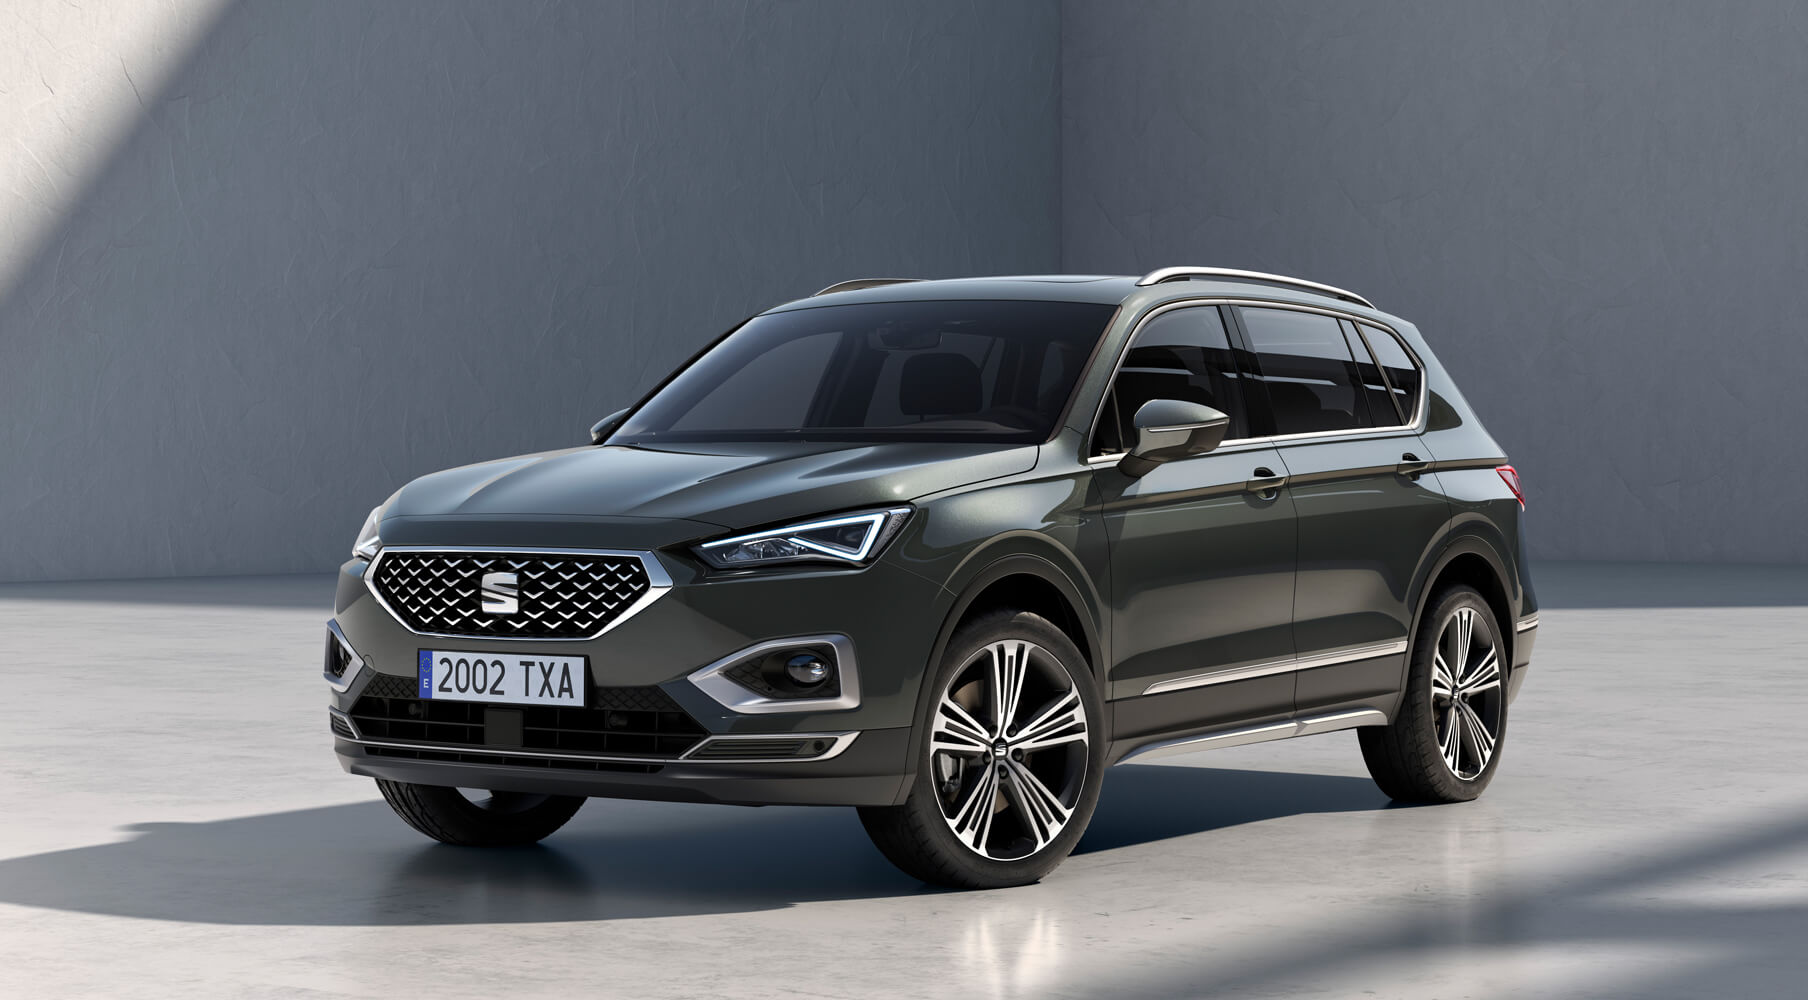 SEAT Tarraco large SUV – SEAT cars – 7 seater SUV with 4x4 4-wheel drive